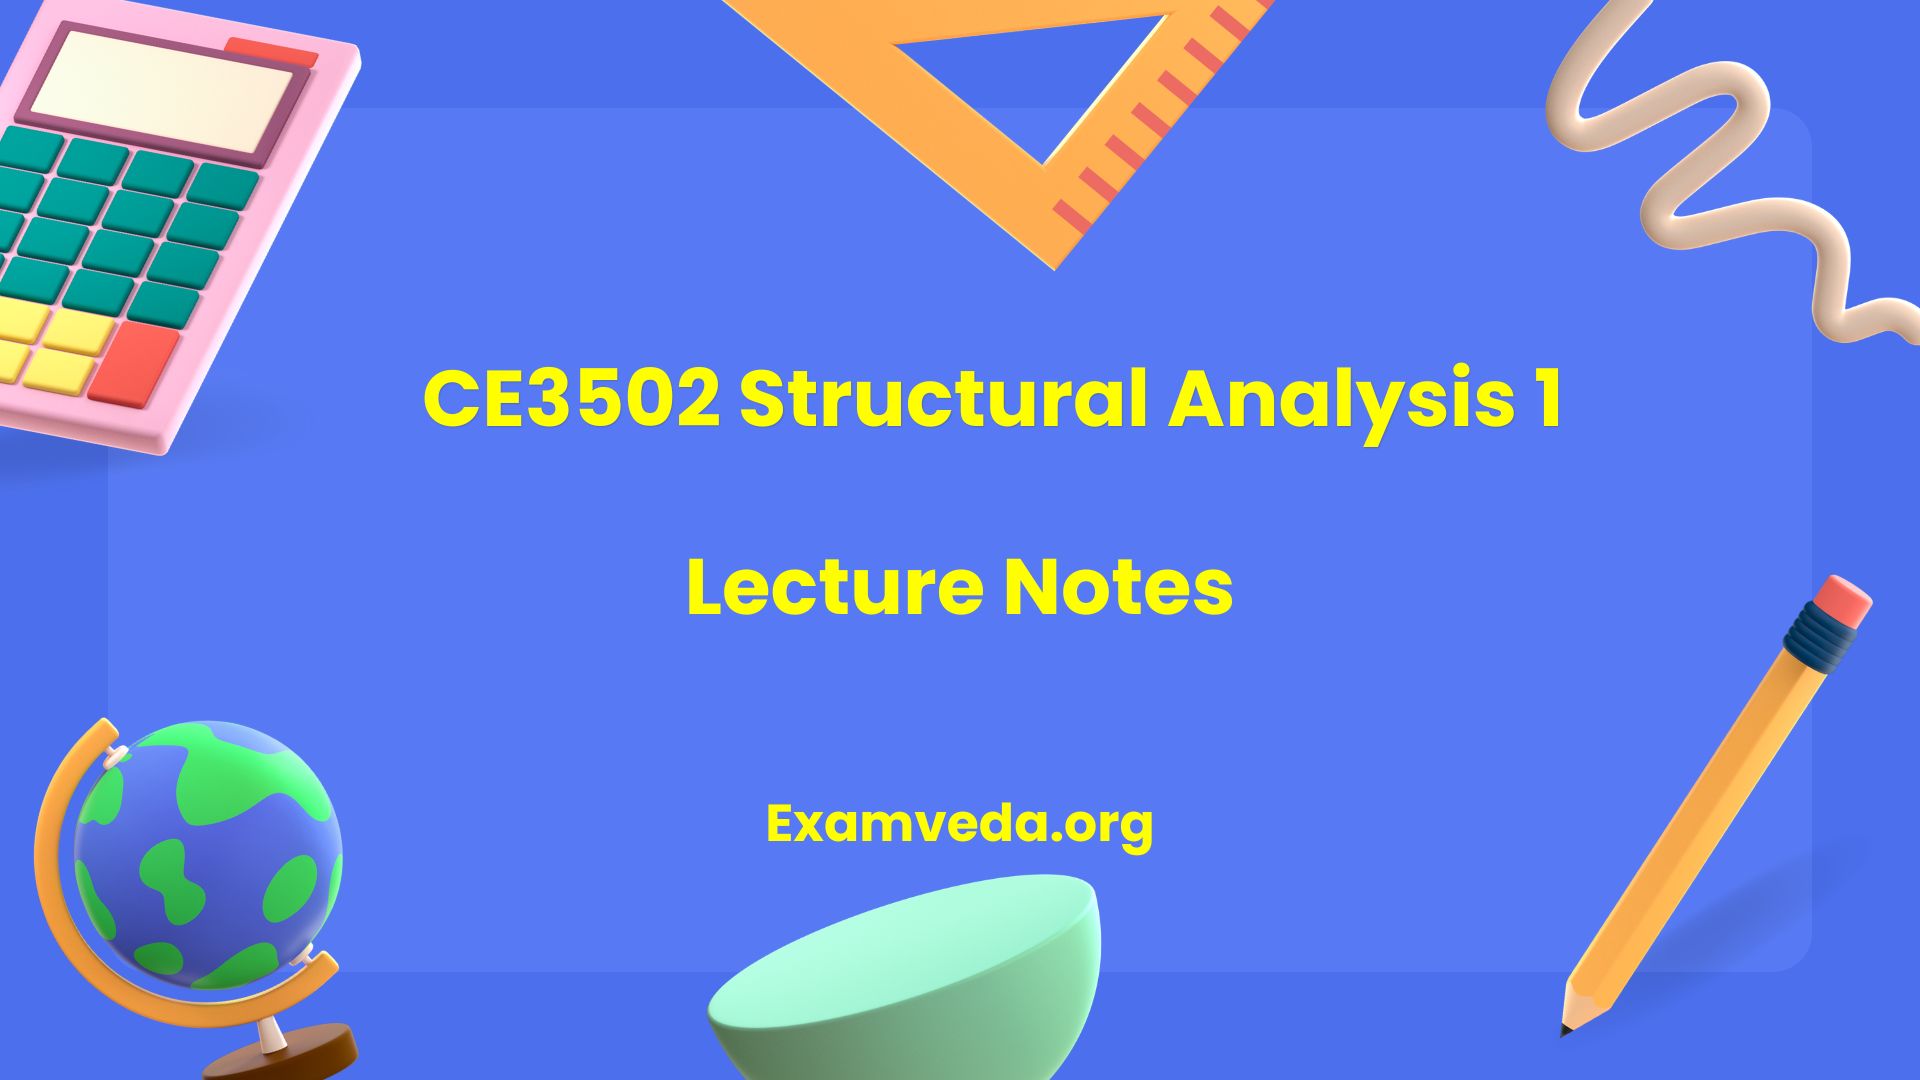 CE3502 Structural Analysis 1 Lecture Notes